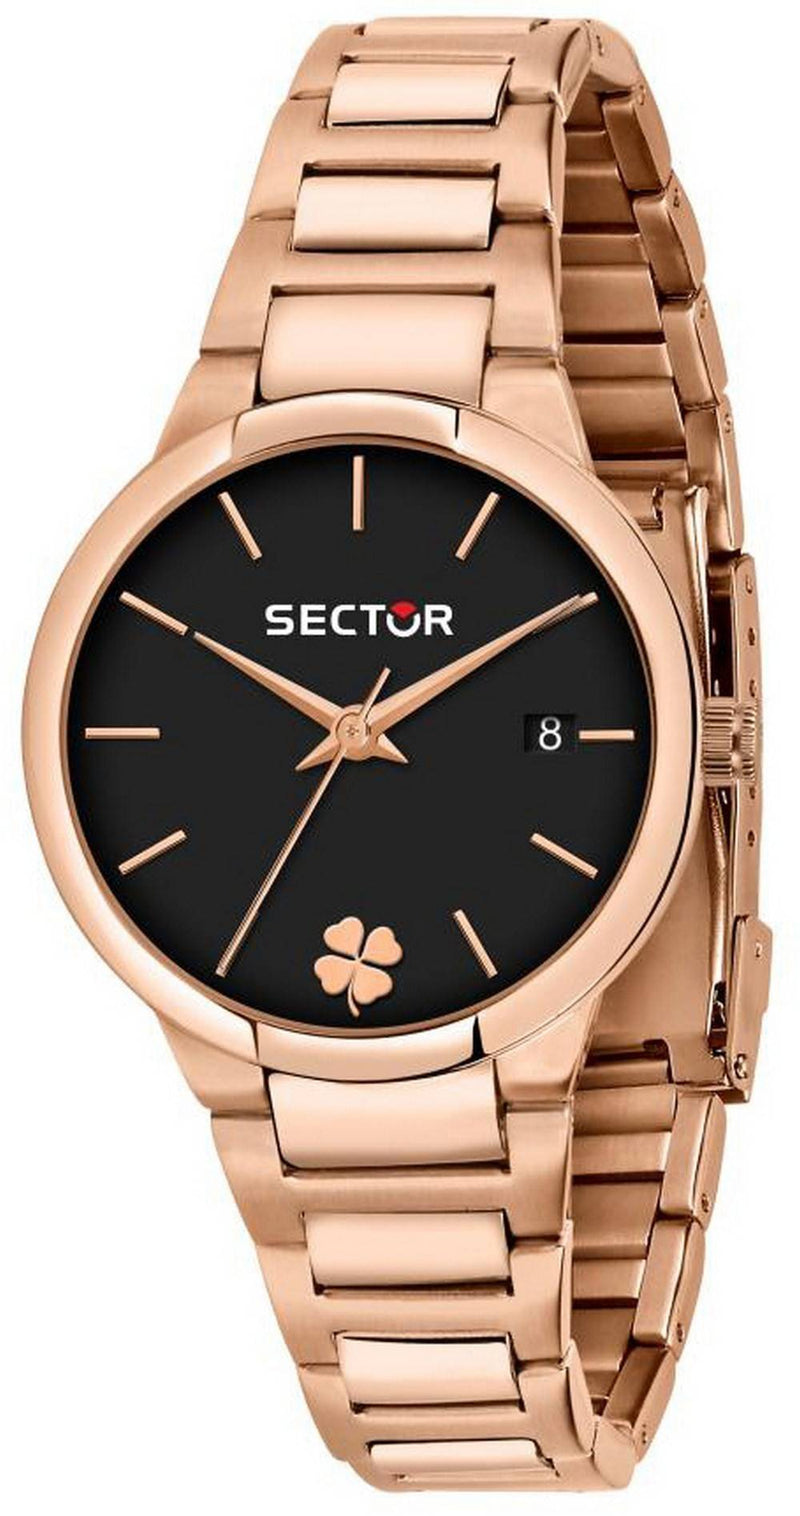 Sector 665 Black Dial Rose Gold Tone Stainless Steel Quartz R3253524503 Women's Watch